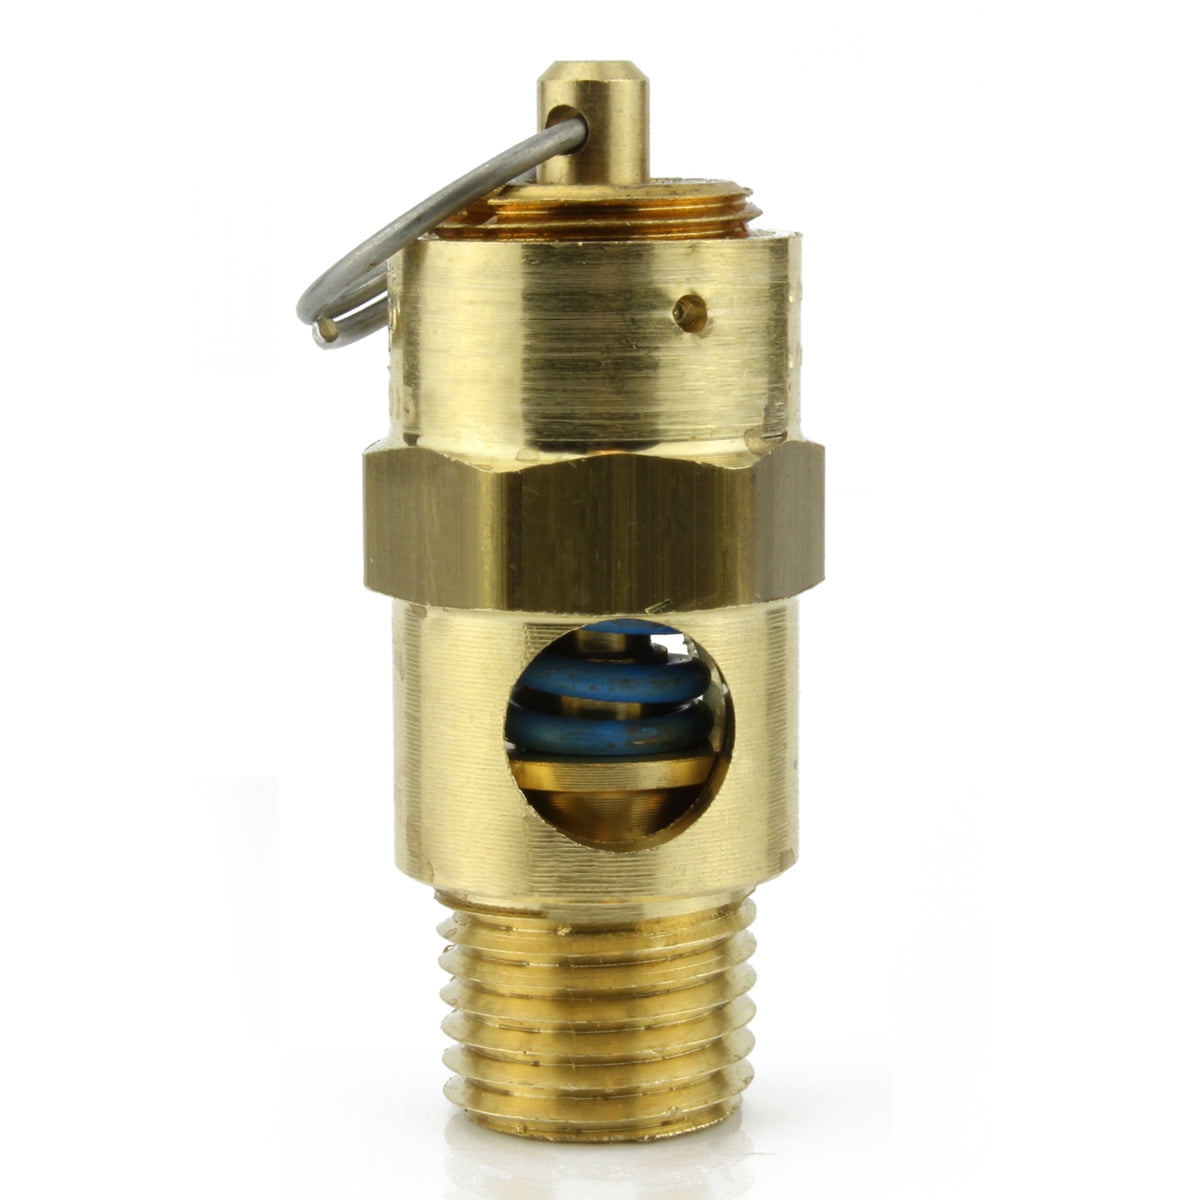 150 PSI Air Compressor Safety Relief Pop Off Valve Solid Brass 1/4" Male NPT New 